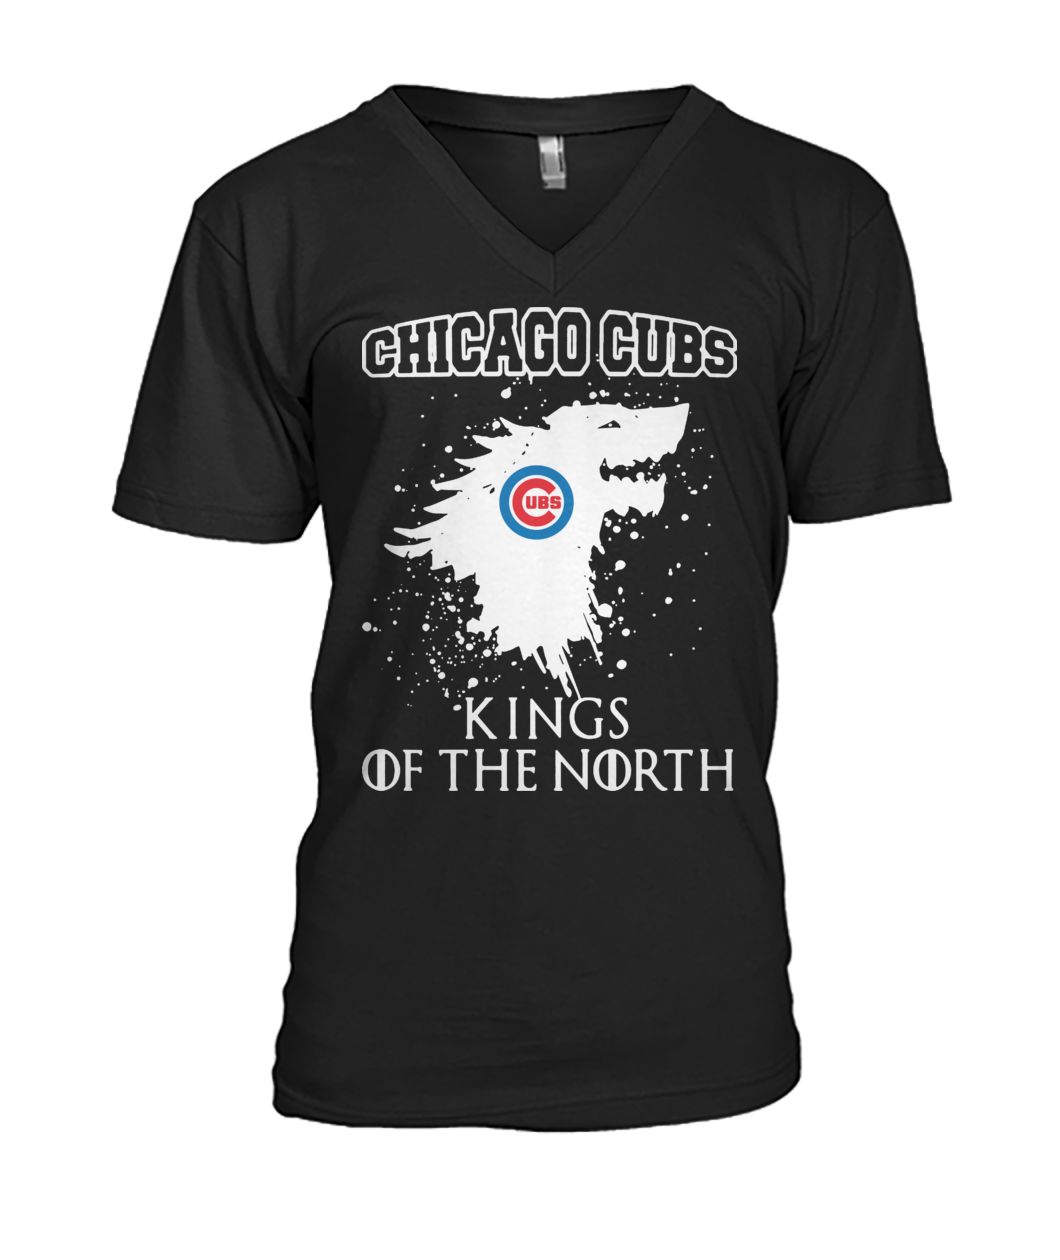 Game of thrones house stark chicago cubs kings of the north mens v-neck